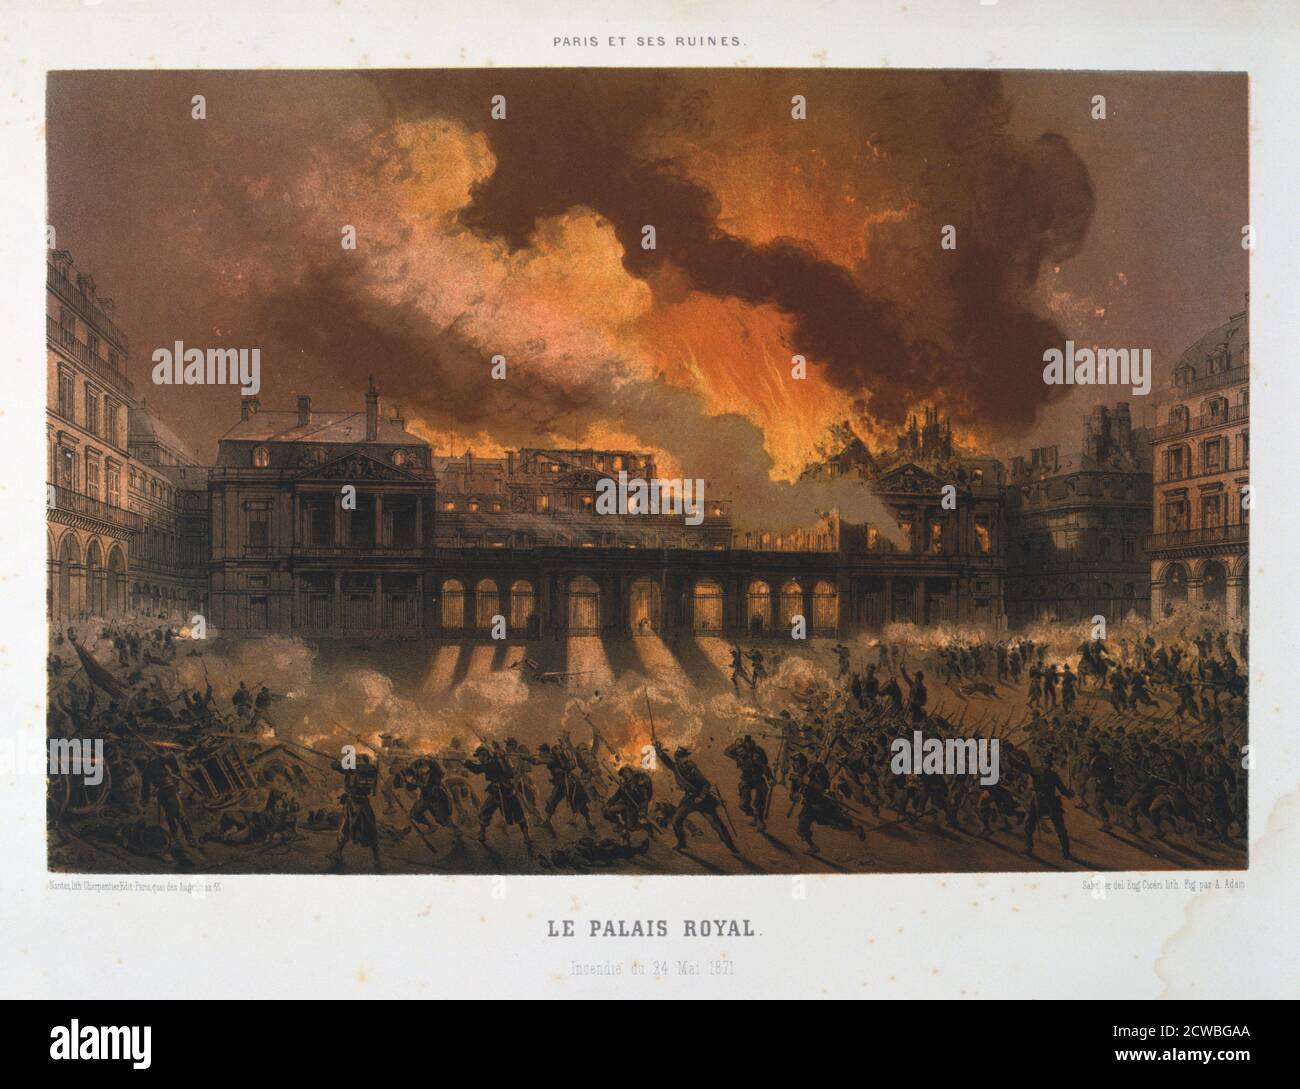 Le Palais Royal', Paris Commune, 24 May 1871. Fierce street fighting during the suppression of the Paris Commune. The Palace of the Tuileries is ablaze in the background after having been set alight by the Communards. Print from a series titled Paris et ses Ruines. From a private collection. Stock Photo